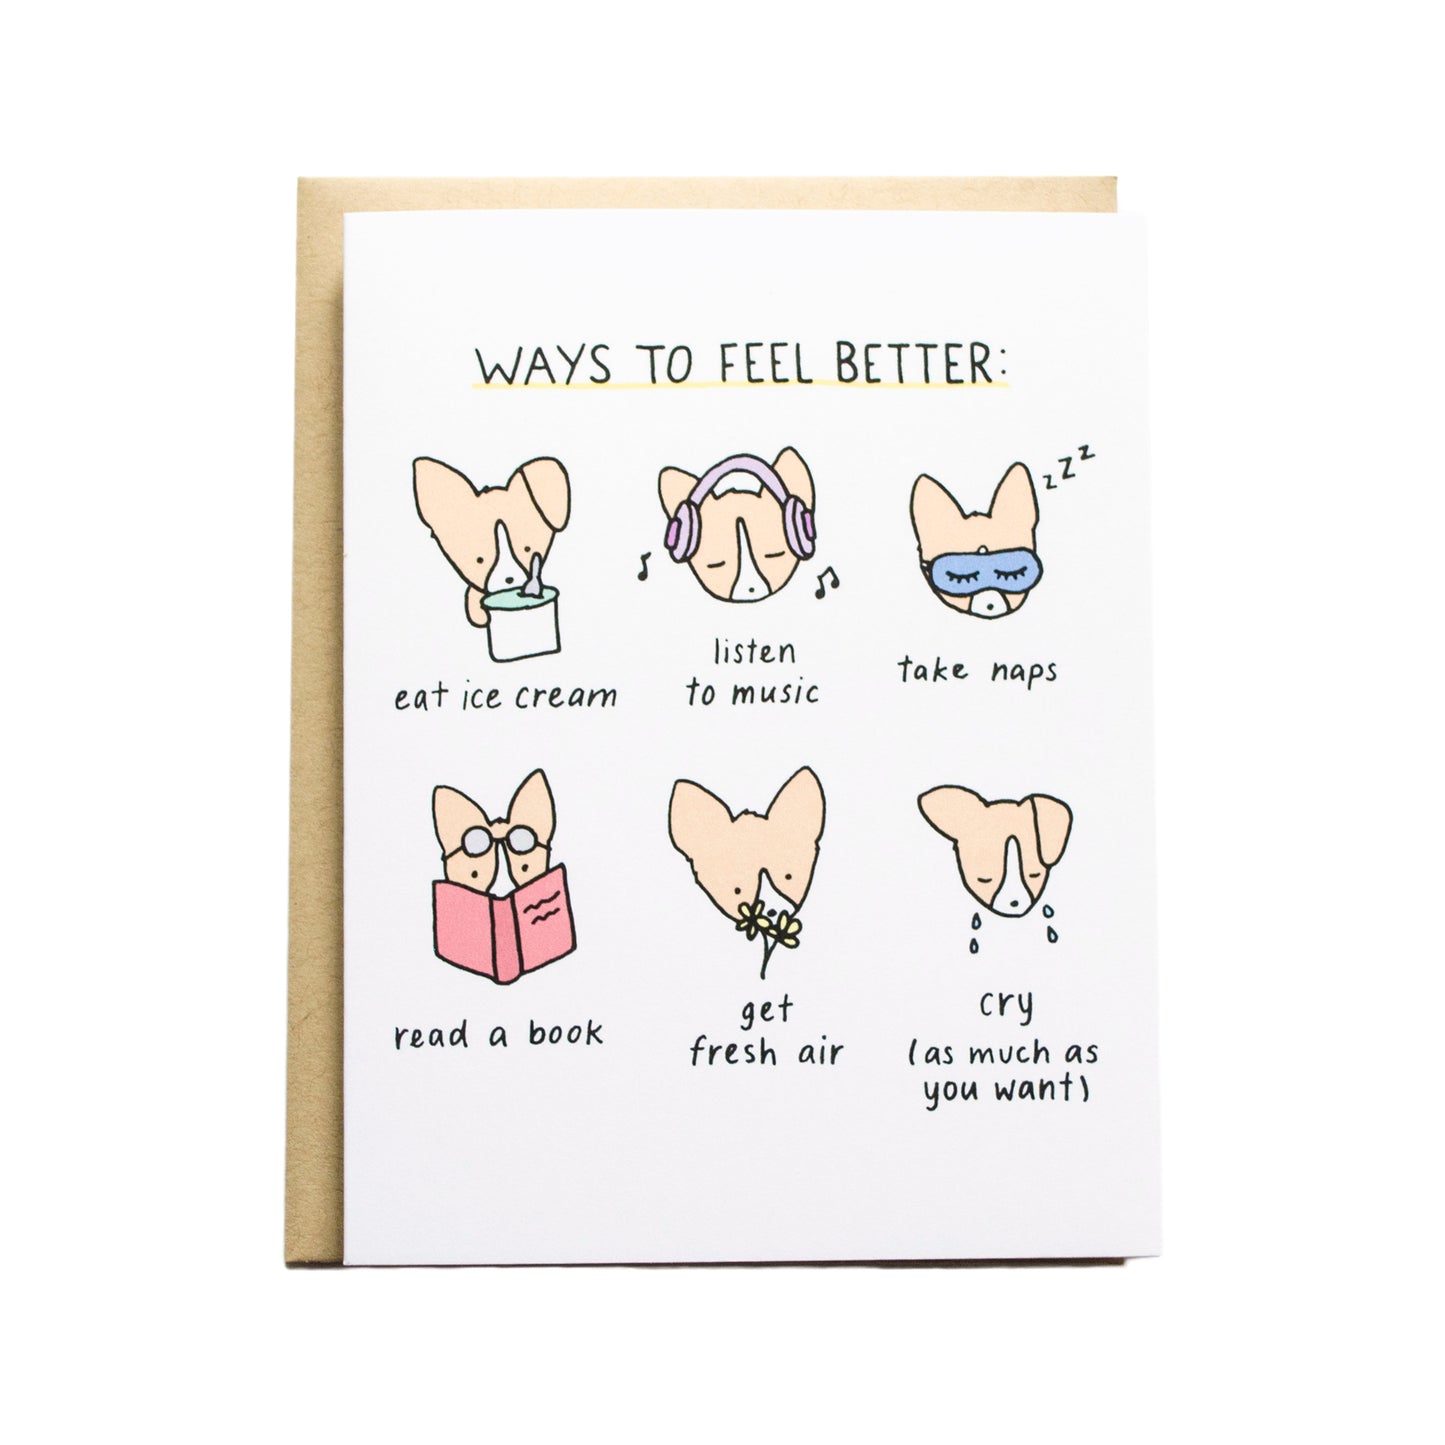 card is titled, ways to feel better, with a chart of corgi heads depicting suggestions: eat ice cream, listen to music, take naps, read a book, get fresh air, and cry (as much as you want)